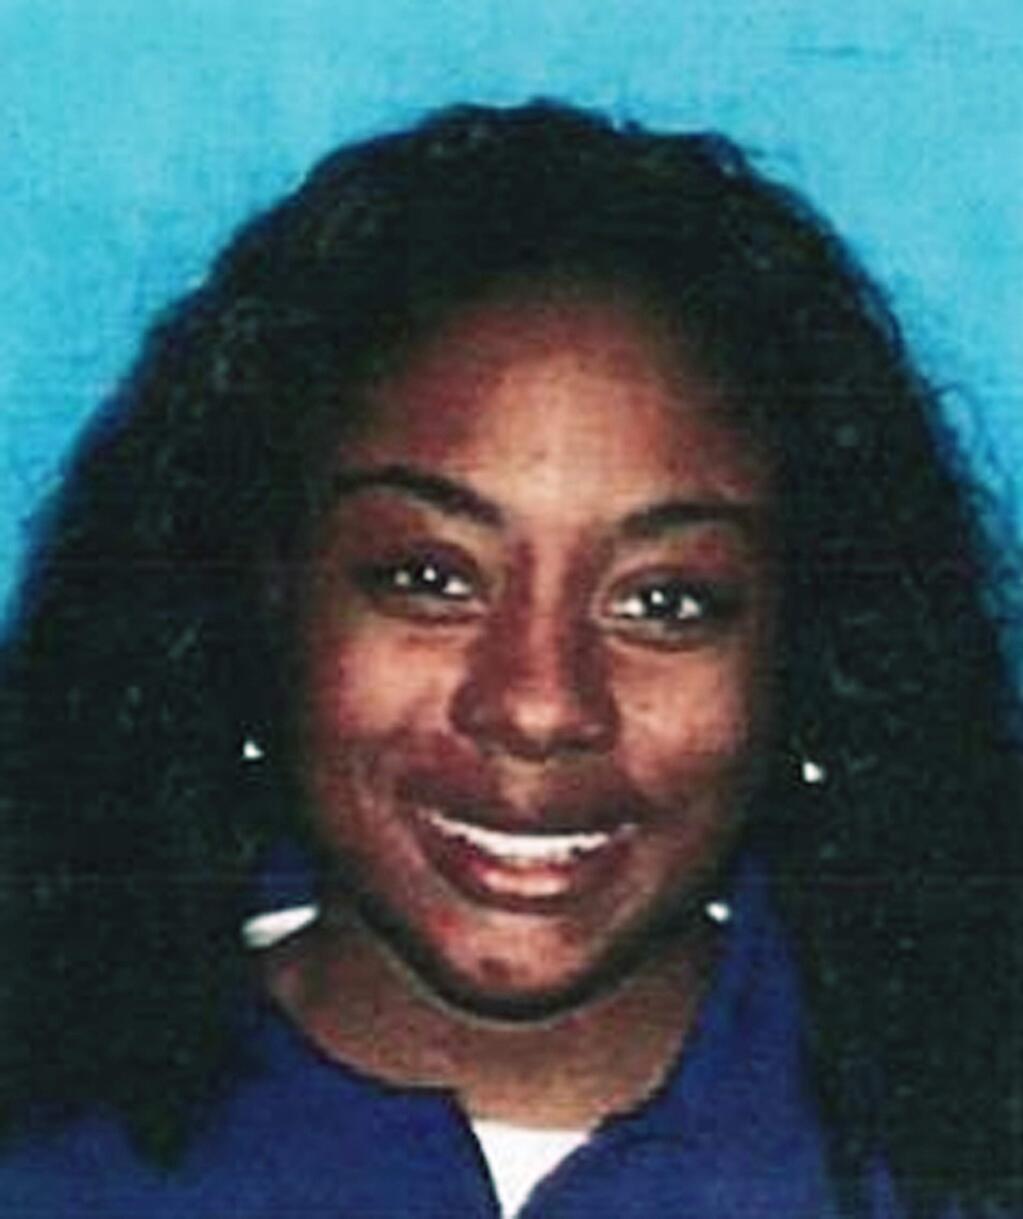 In this undated photo released by the Sacramento Police Department is Perrean Gray. Police in Northern California say they've used new DNA technology to identify a victim found burning in a garbage bin 18 years ago. Sacramento police said Tuesday, Nov. 26, 2019, that firefighters found a woman's body when they put out the blaze early on June 29, 2001. Investigators recently tracked DNA through a private genealogy laboratory to identify the woman as Perrean Gray, who had been reported as a missing person in San Francisco. (Sacramento Police Department via AP)